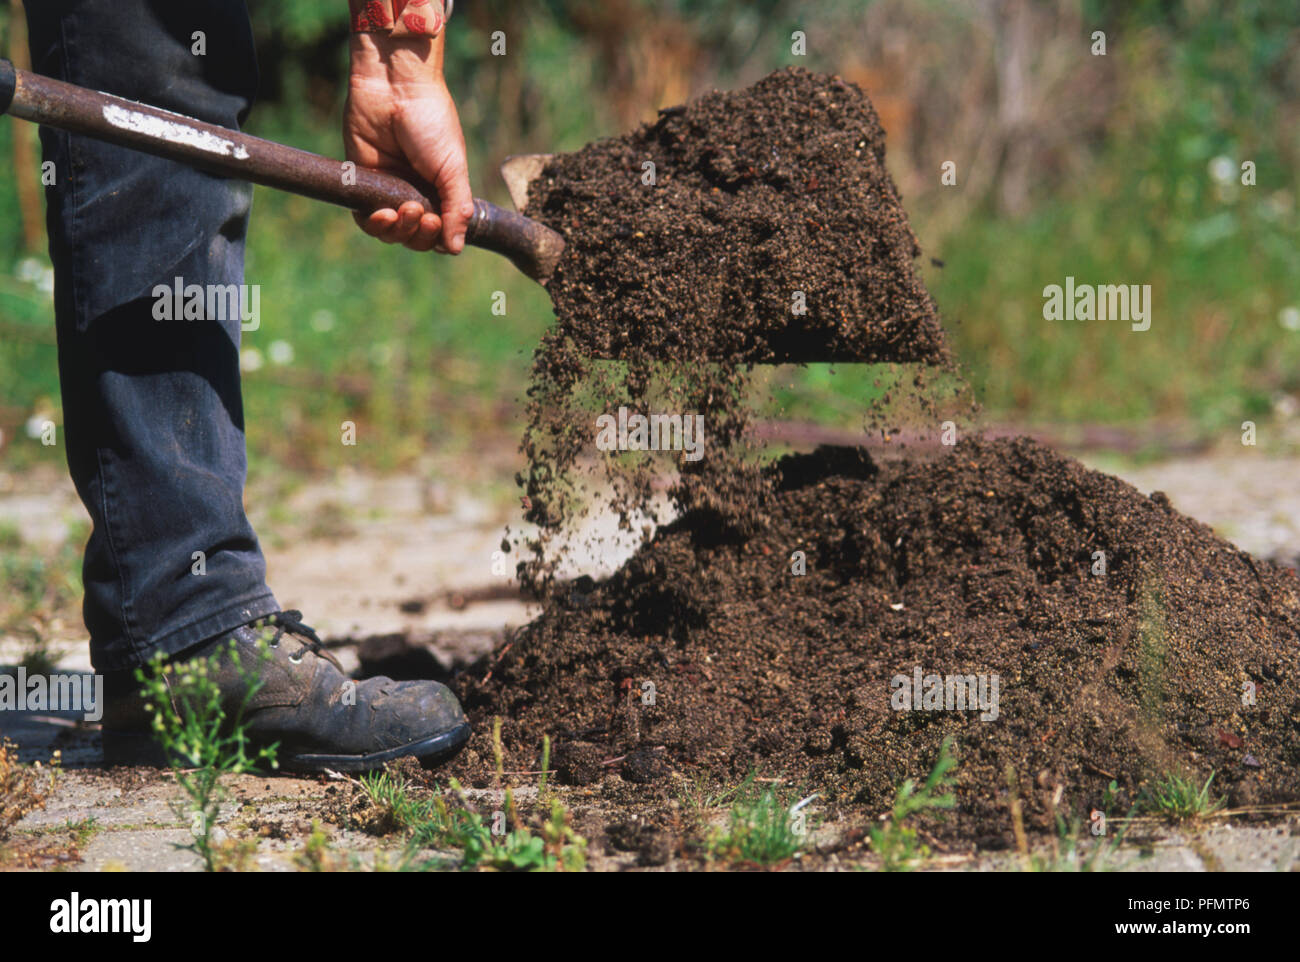 Using long-handled spade to lift mix of fertiliser and soil, close up. Stock Photo